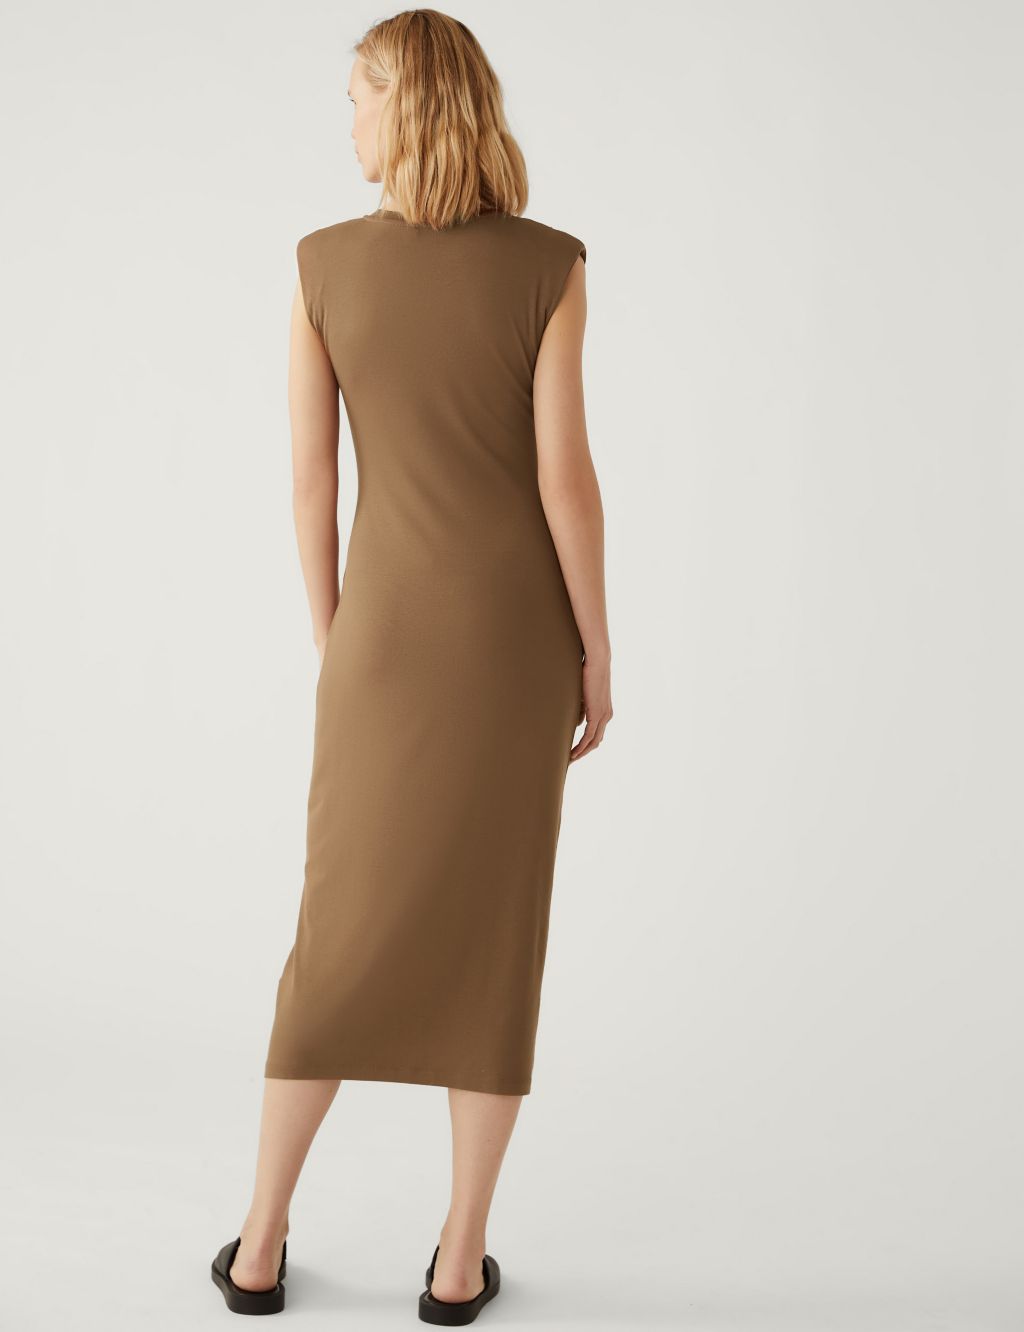 Jersey Round Neck Ruched Midi Bodycon Dress image 4